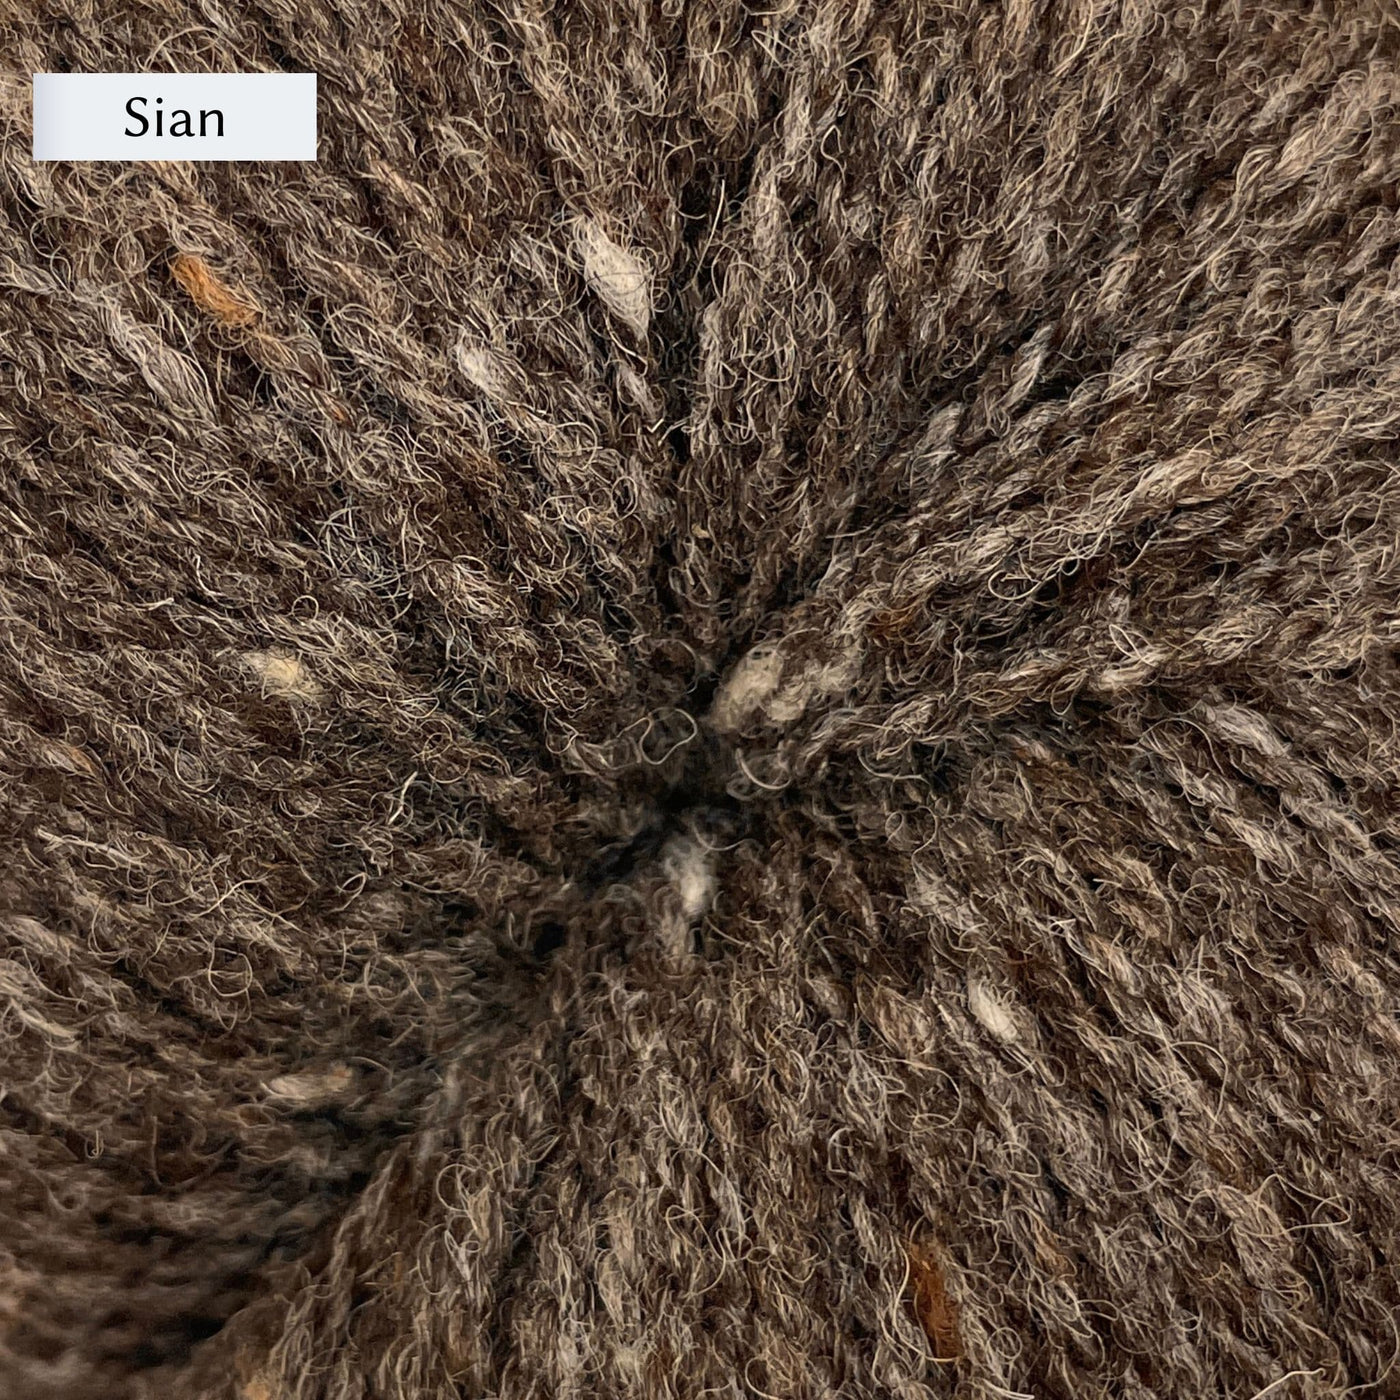 Uist Wool Yarn DK weight in Sian, a brown grey color.